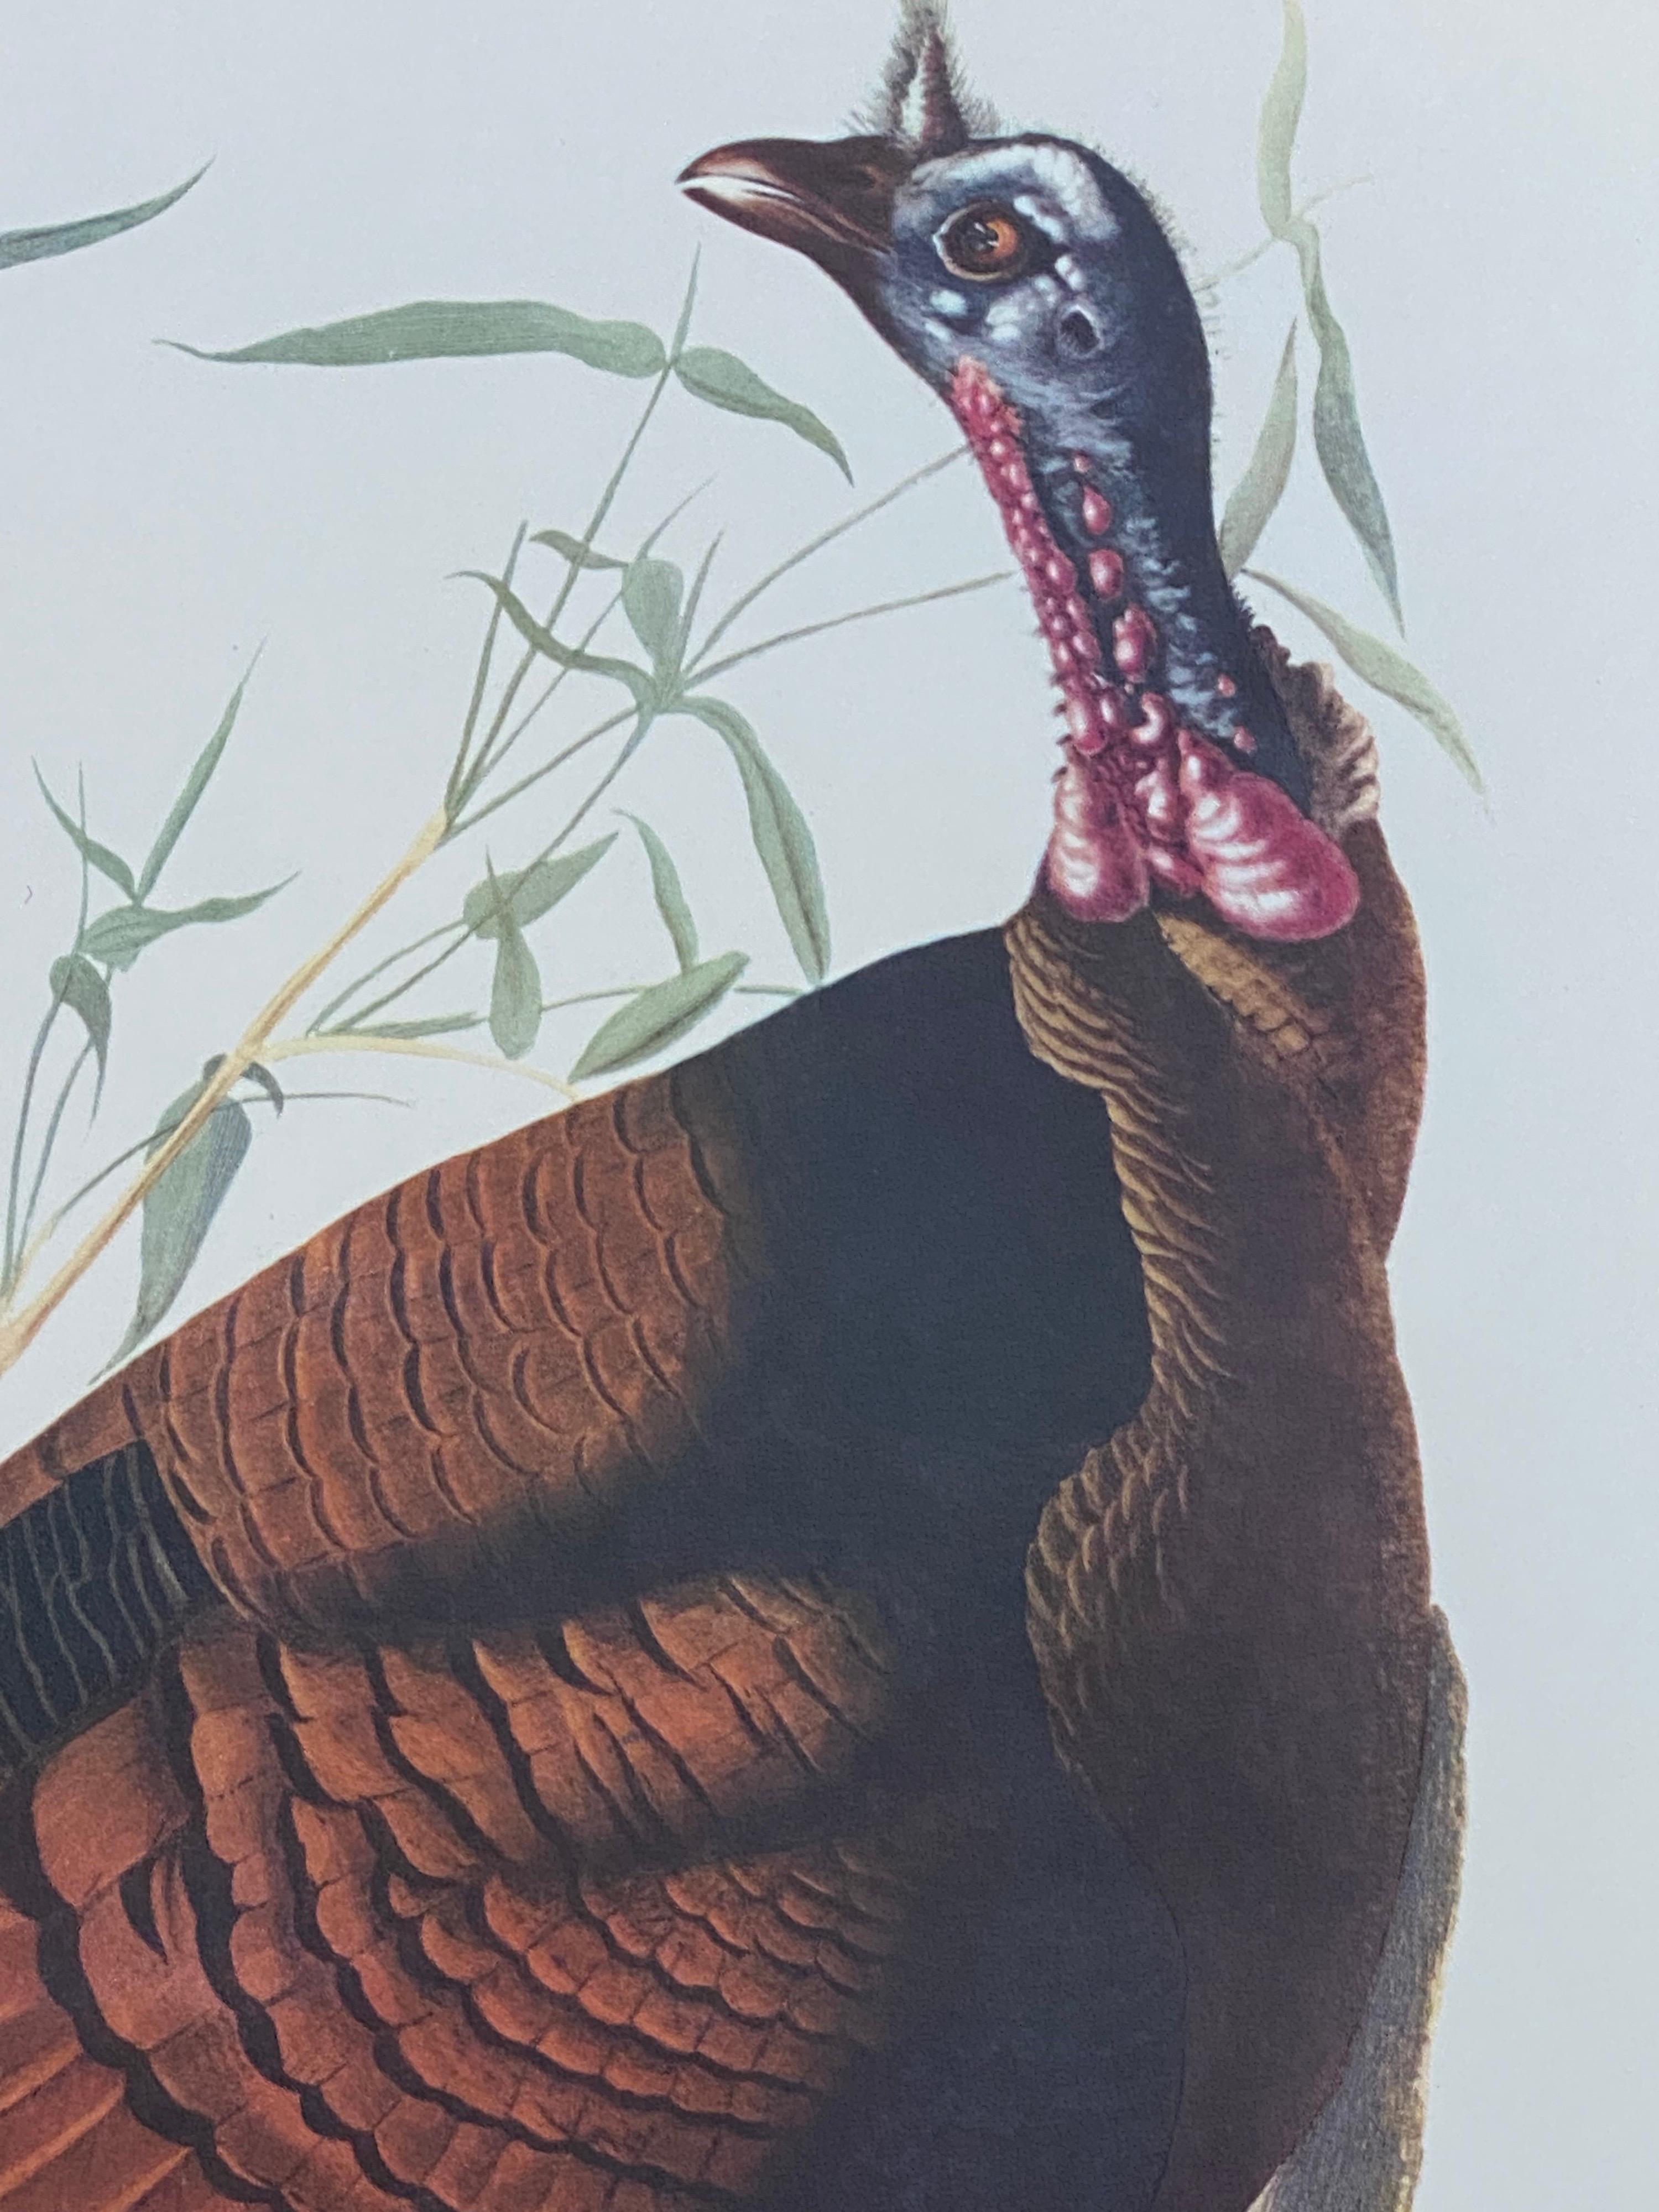 Classical Bird print, 
after John James Audubon, 
printed by Harry N. Abrams, Publishers, New York
unframed, 17 x 14 inches color print on paper
condition: very good
provenance: from a private collector here in the UK. 

Free shipping